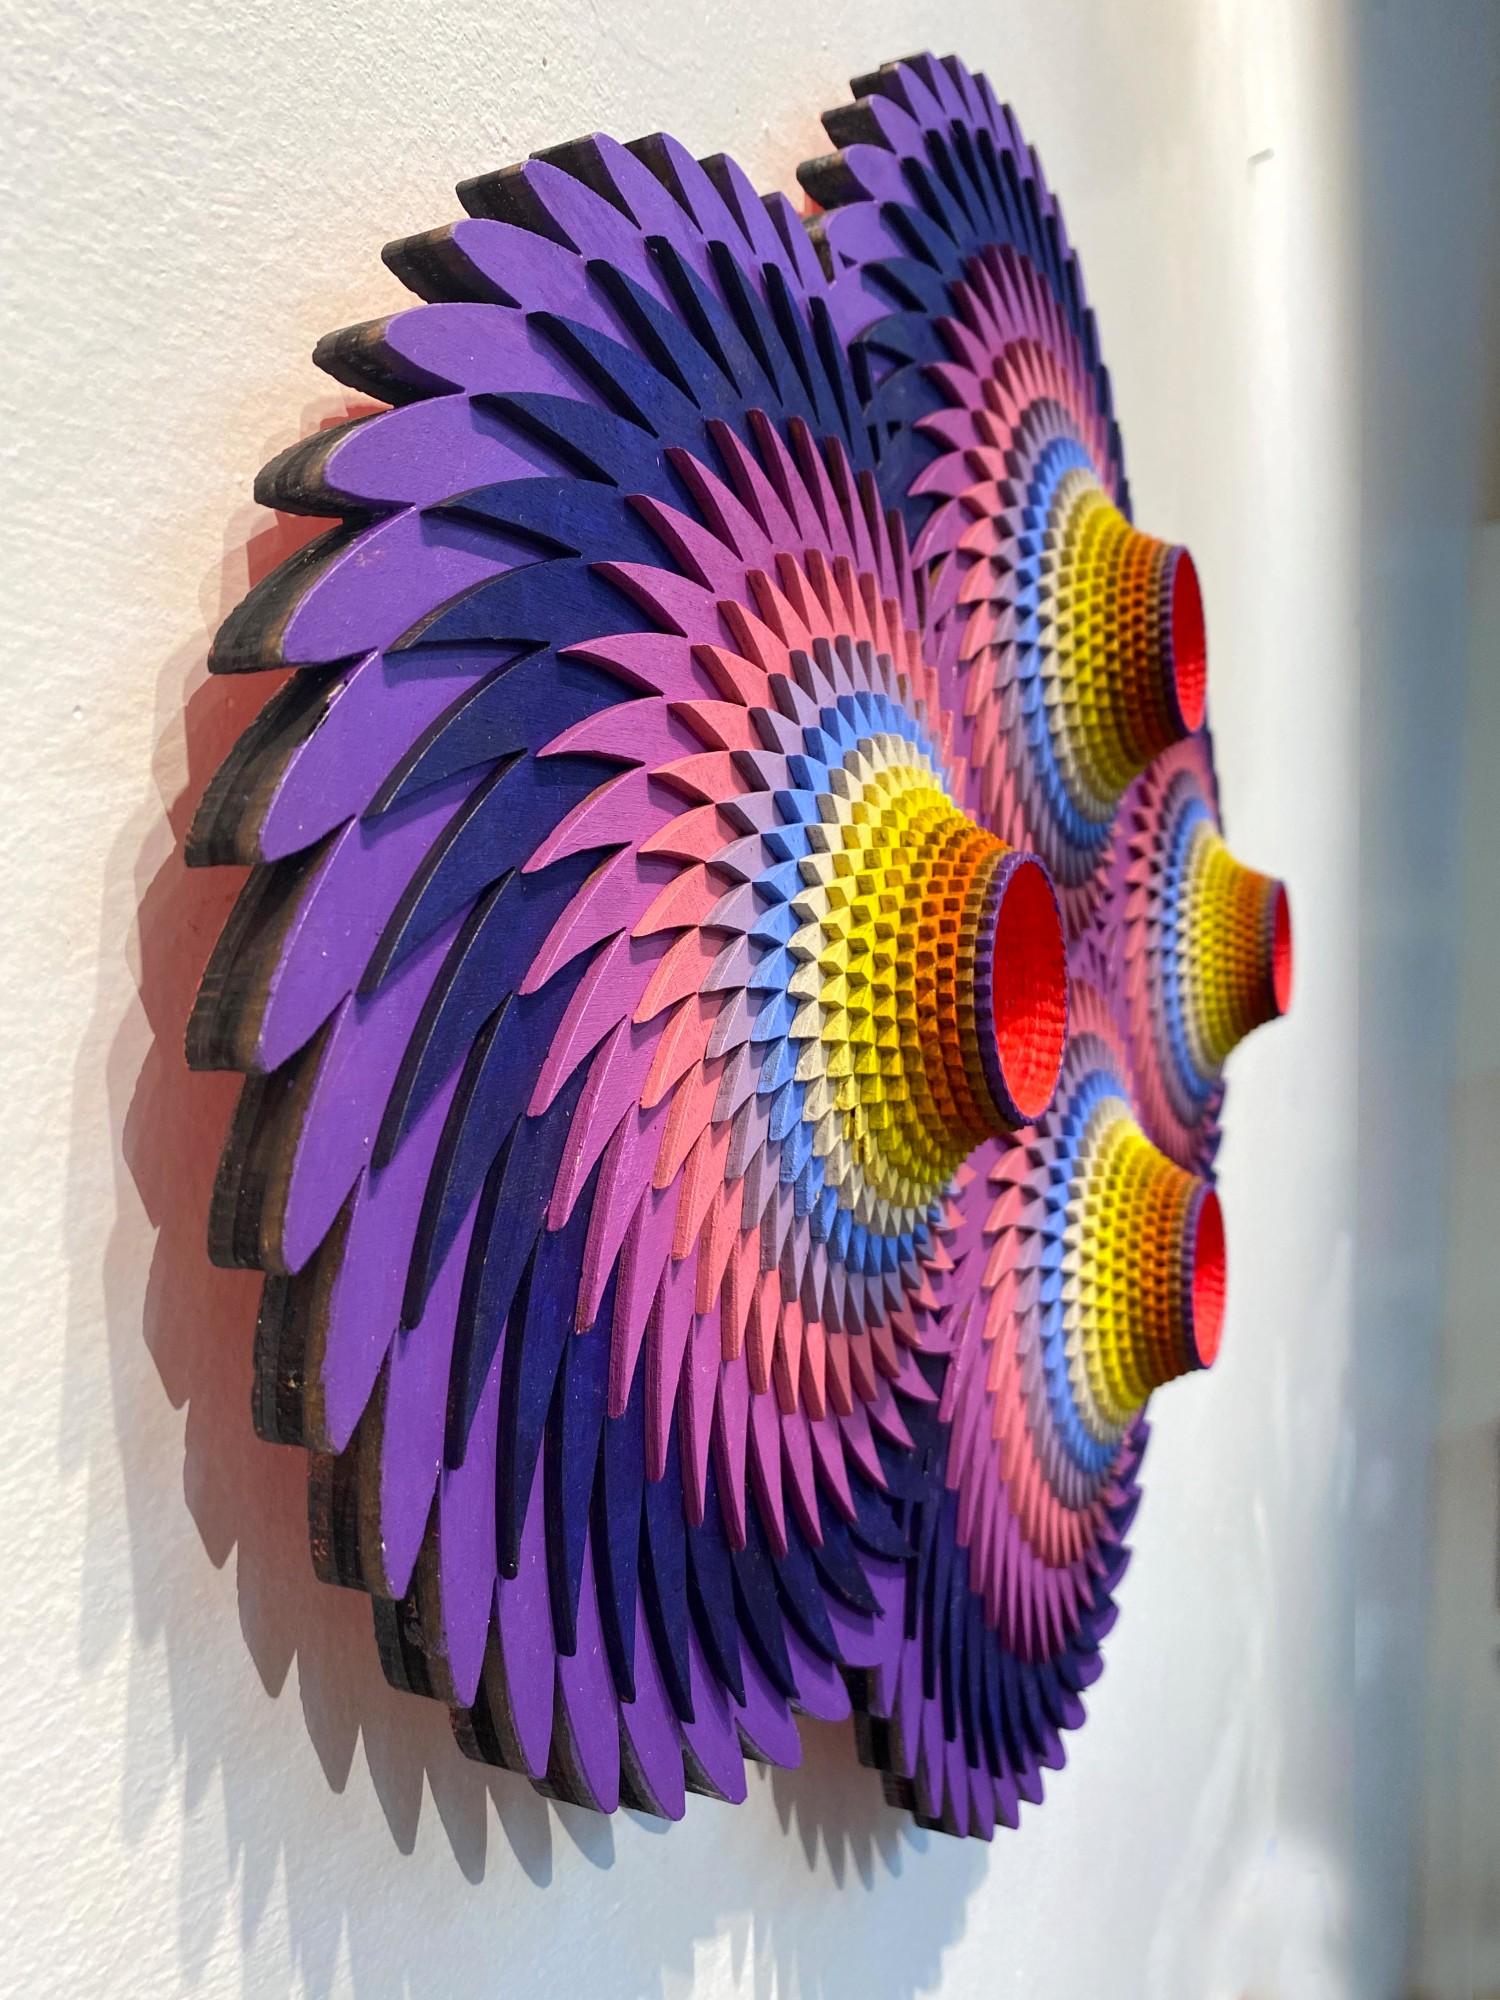 Tempesta Violet, Acrylic on Wood by Christine Romanell

ARTIST BIO
Christine Romanell’s colorful wall sculptures and installations explore non-repeating patterns informed by cosmology and physics, while rooting itself in applied design similar to